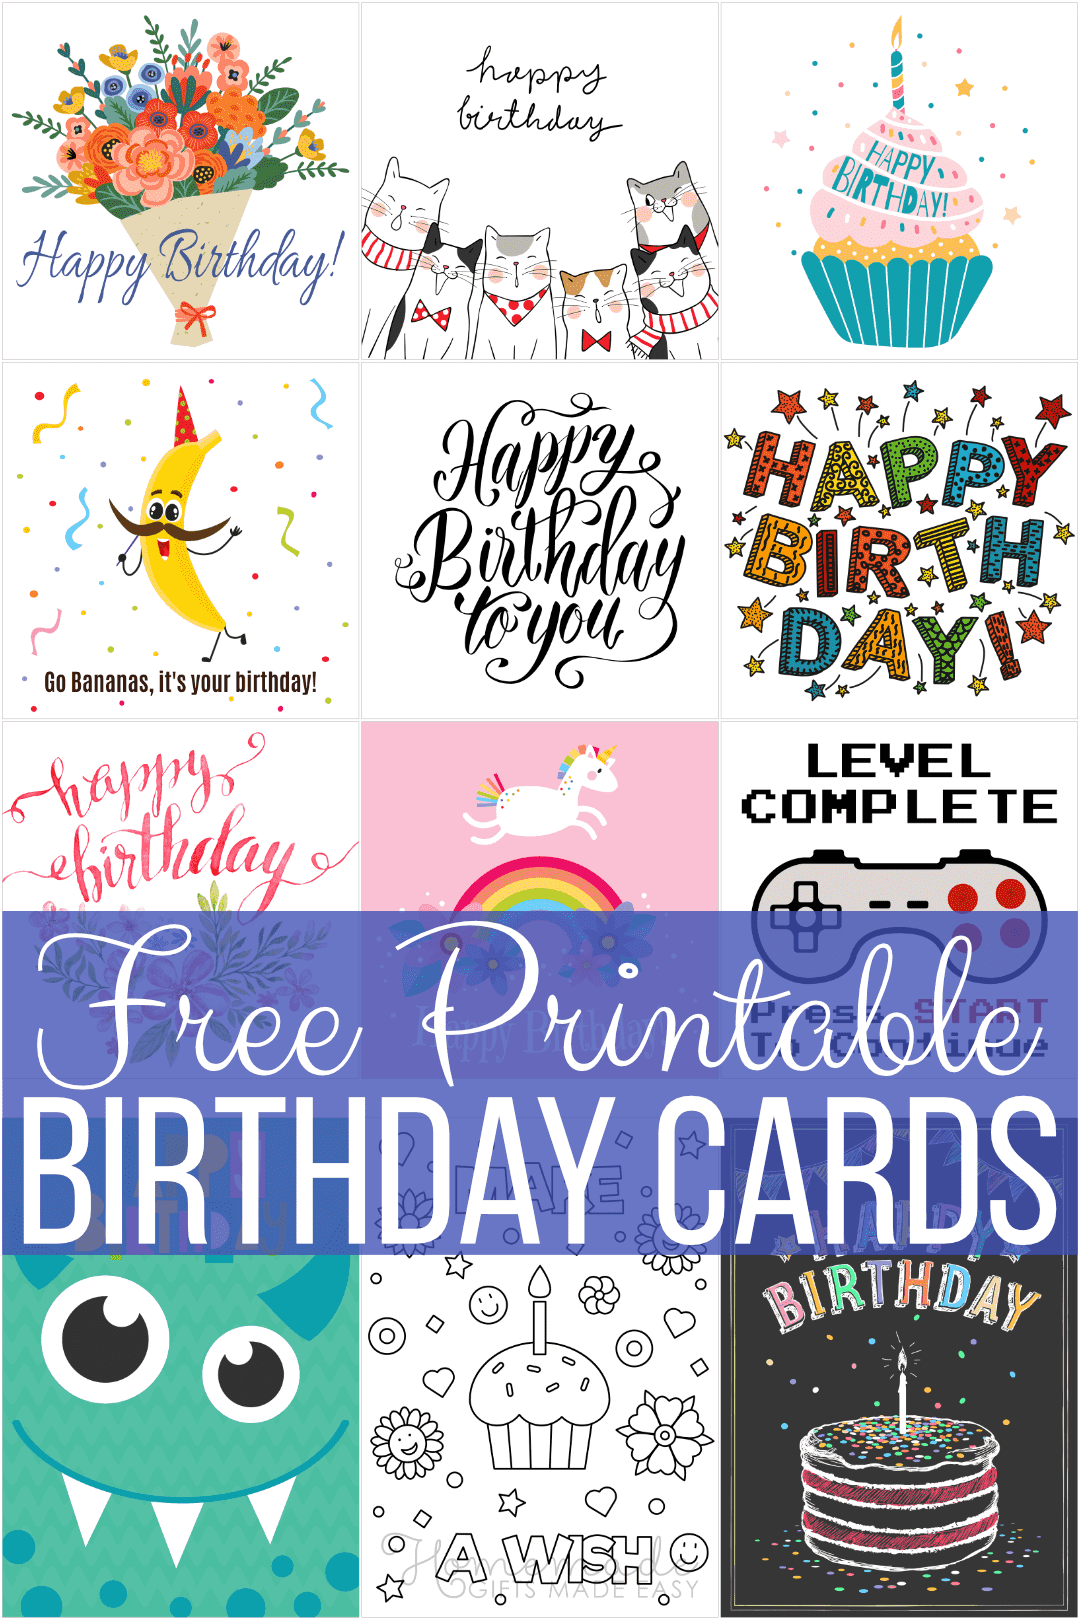 Free Printable Birthday Cards For Everyone - Free Printable Birthday Cards For Mom